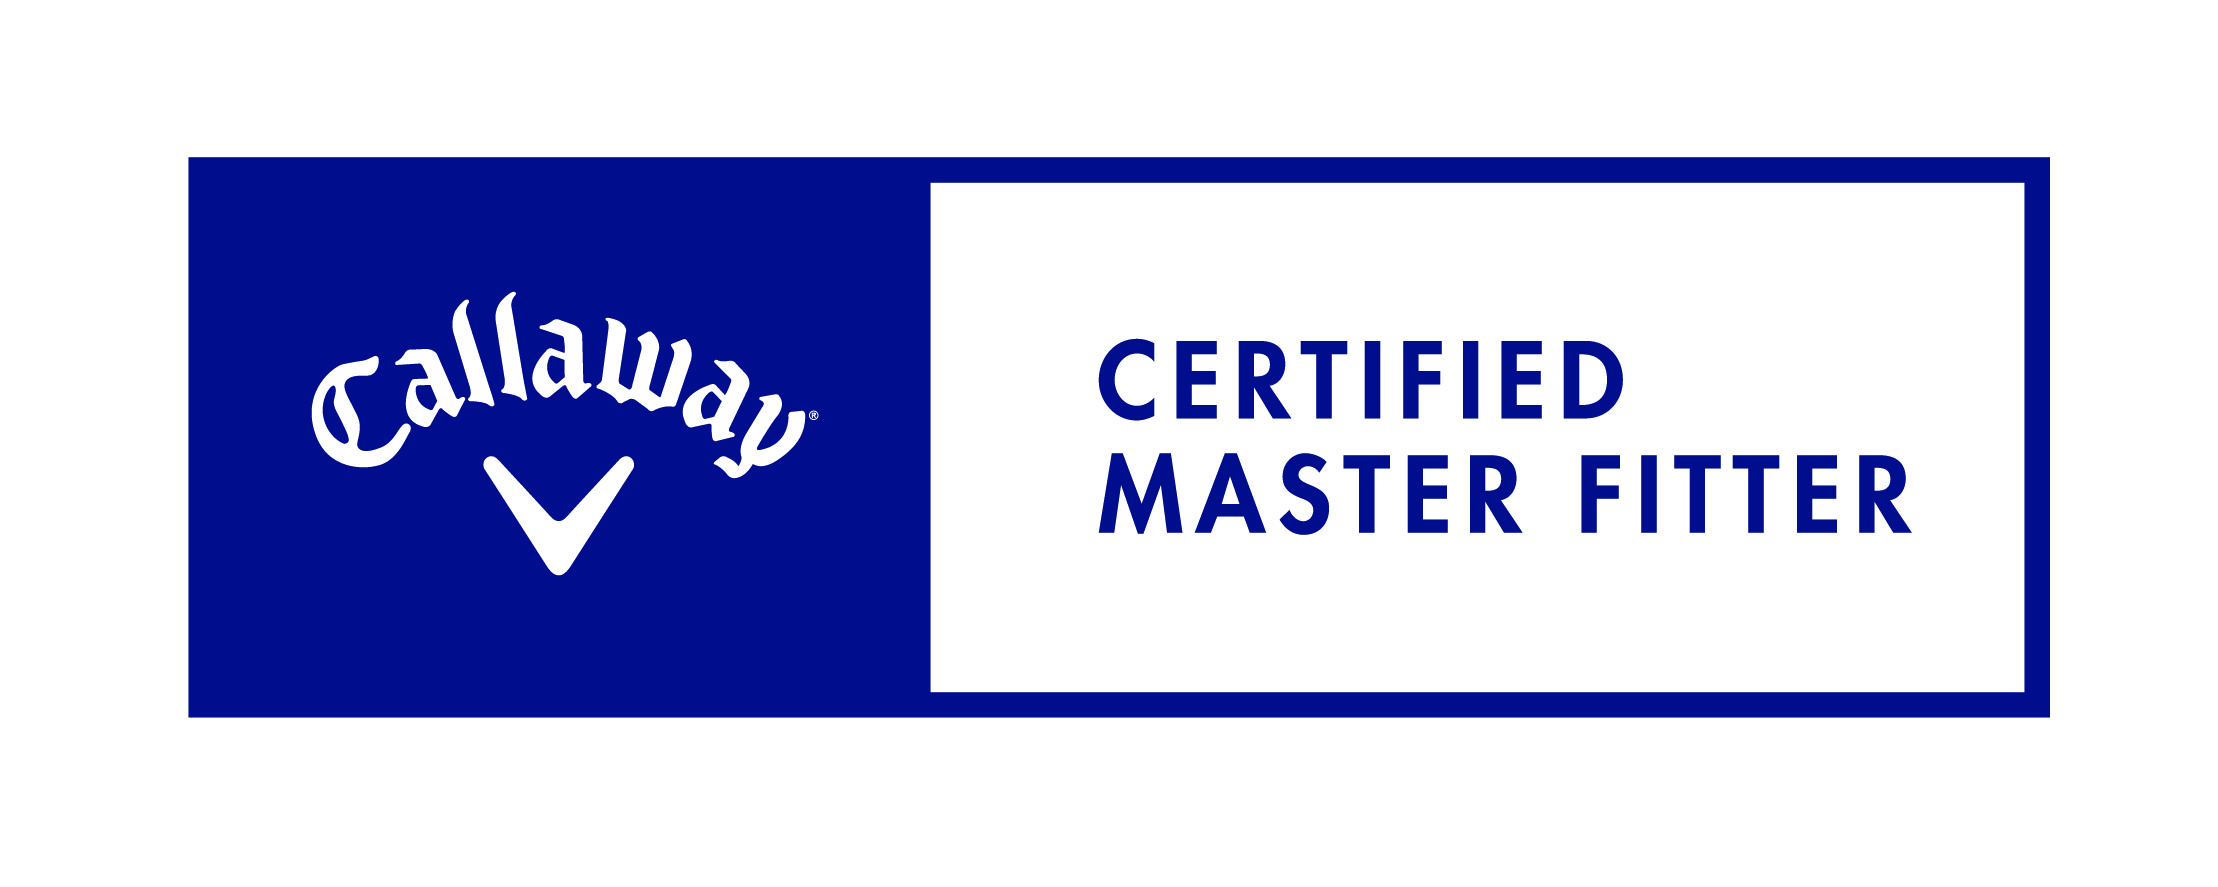 Callaway Certified Master Fitter